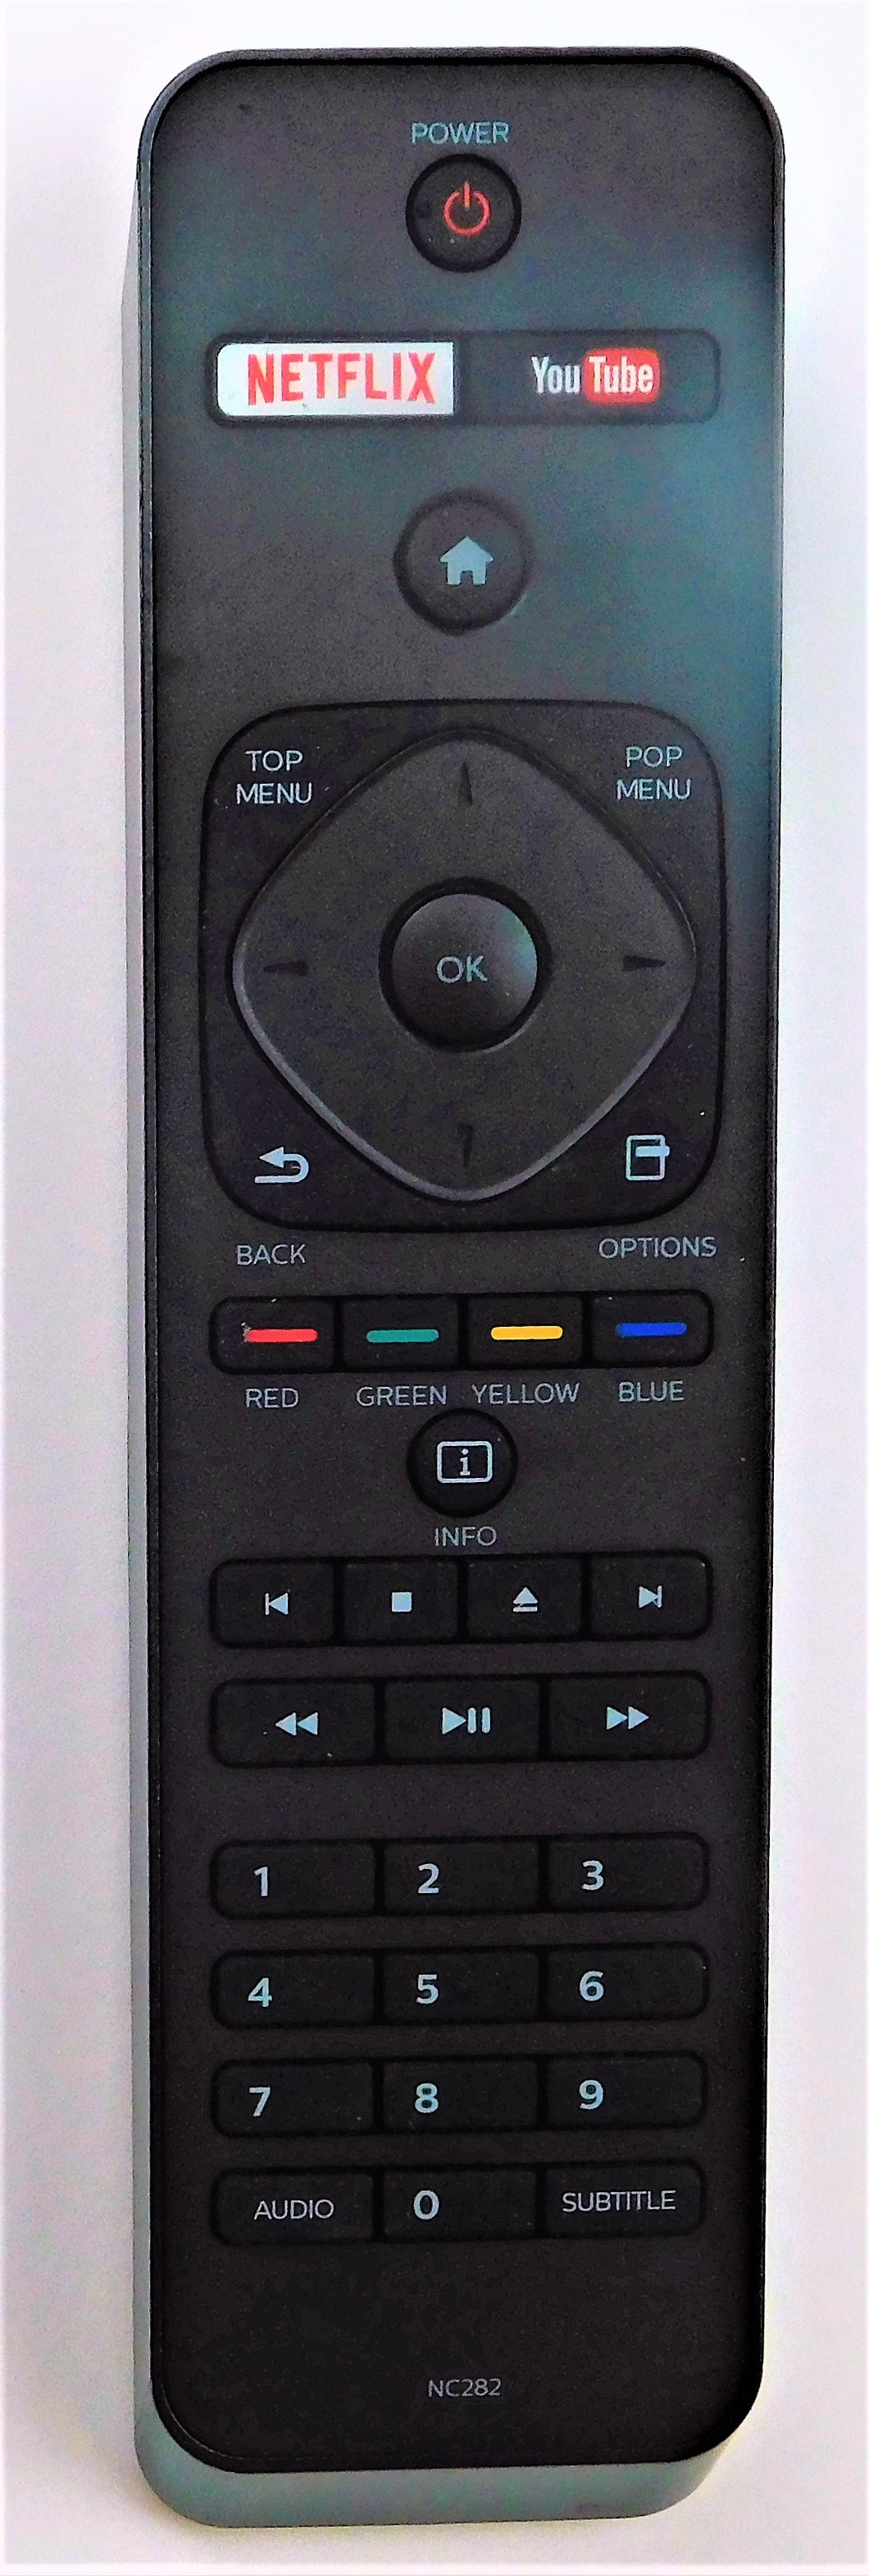 Original OEM replacement remote for Philips Blu-ray players NC282UH